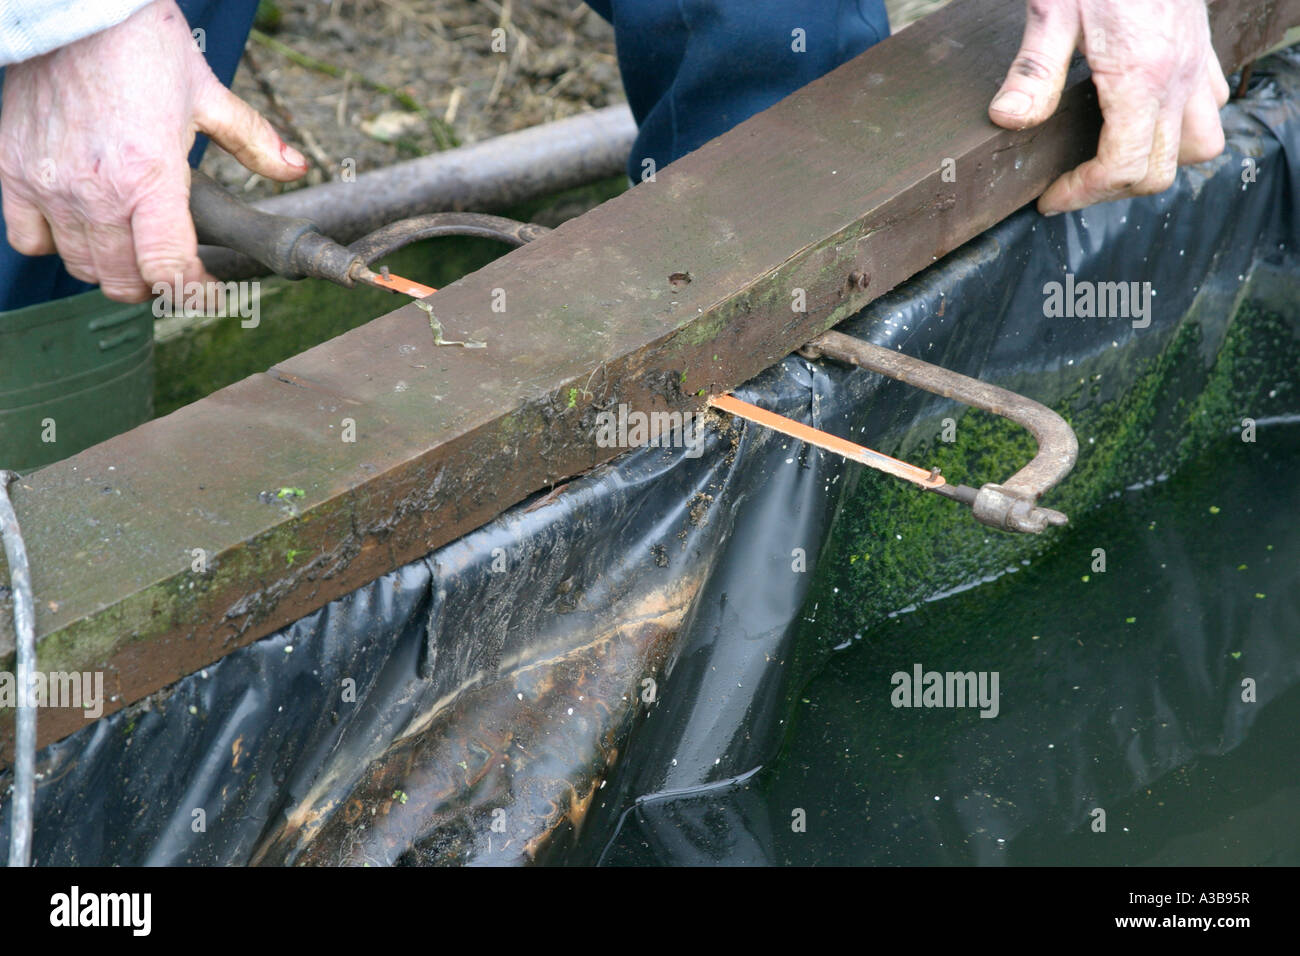 changing the liner remove the pond edging Stock Photo